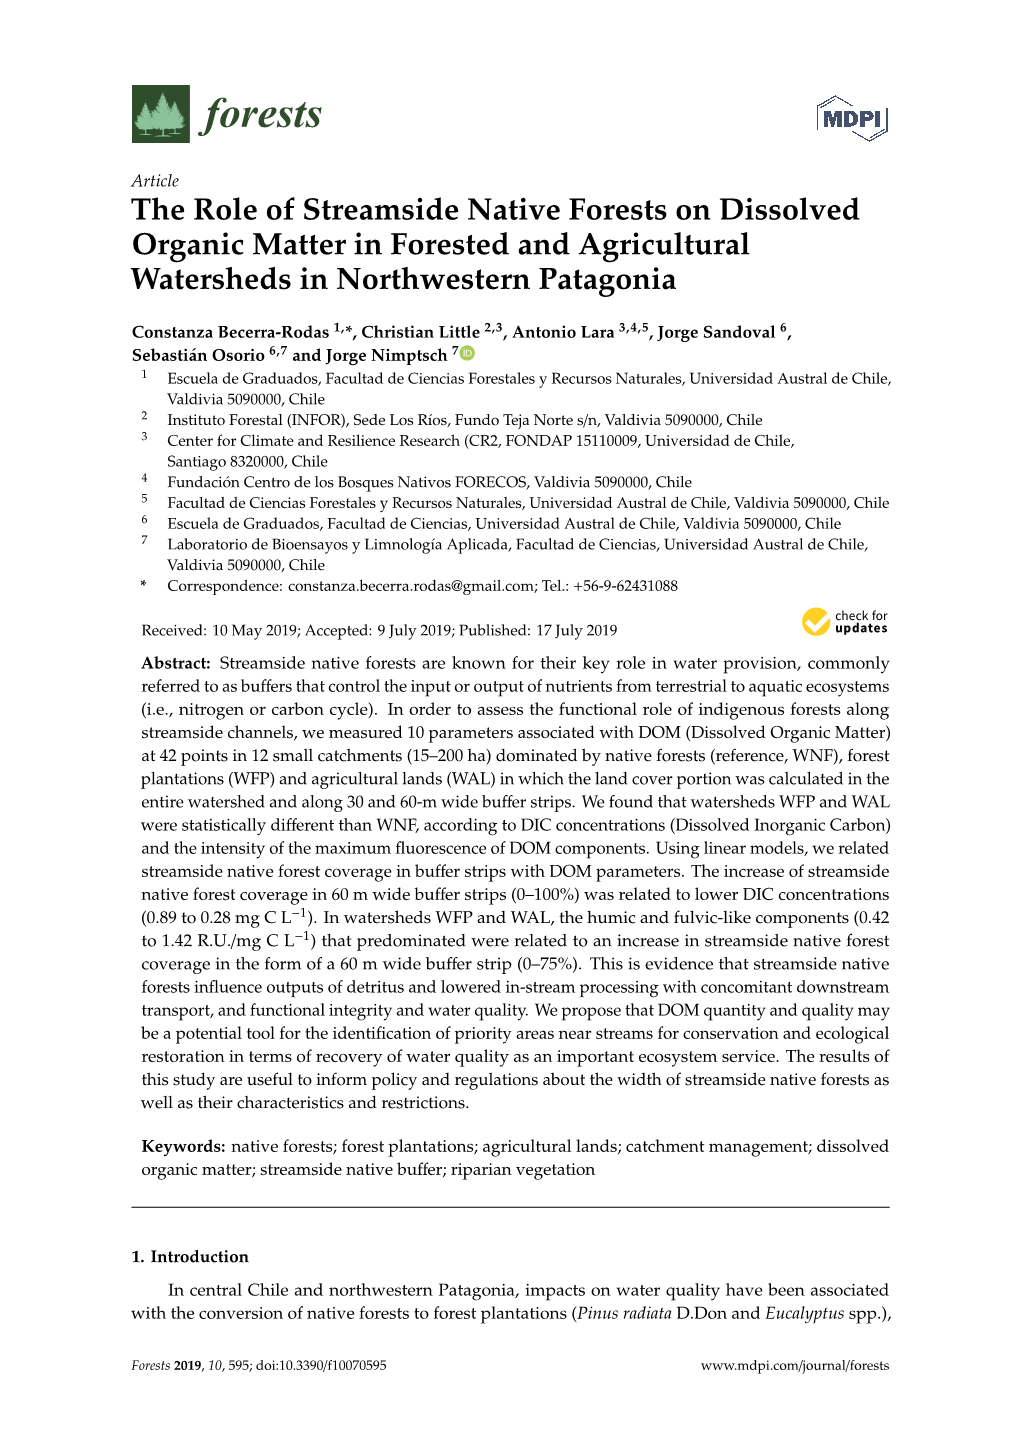 The Role of Streamside Native Forests on Dissolved Organic Matter in Forested and Agricultural Watersheds in Northwestern Patagonia